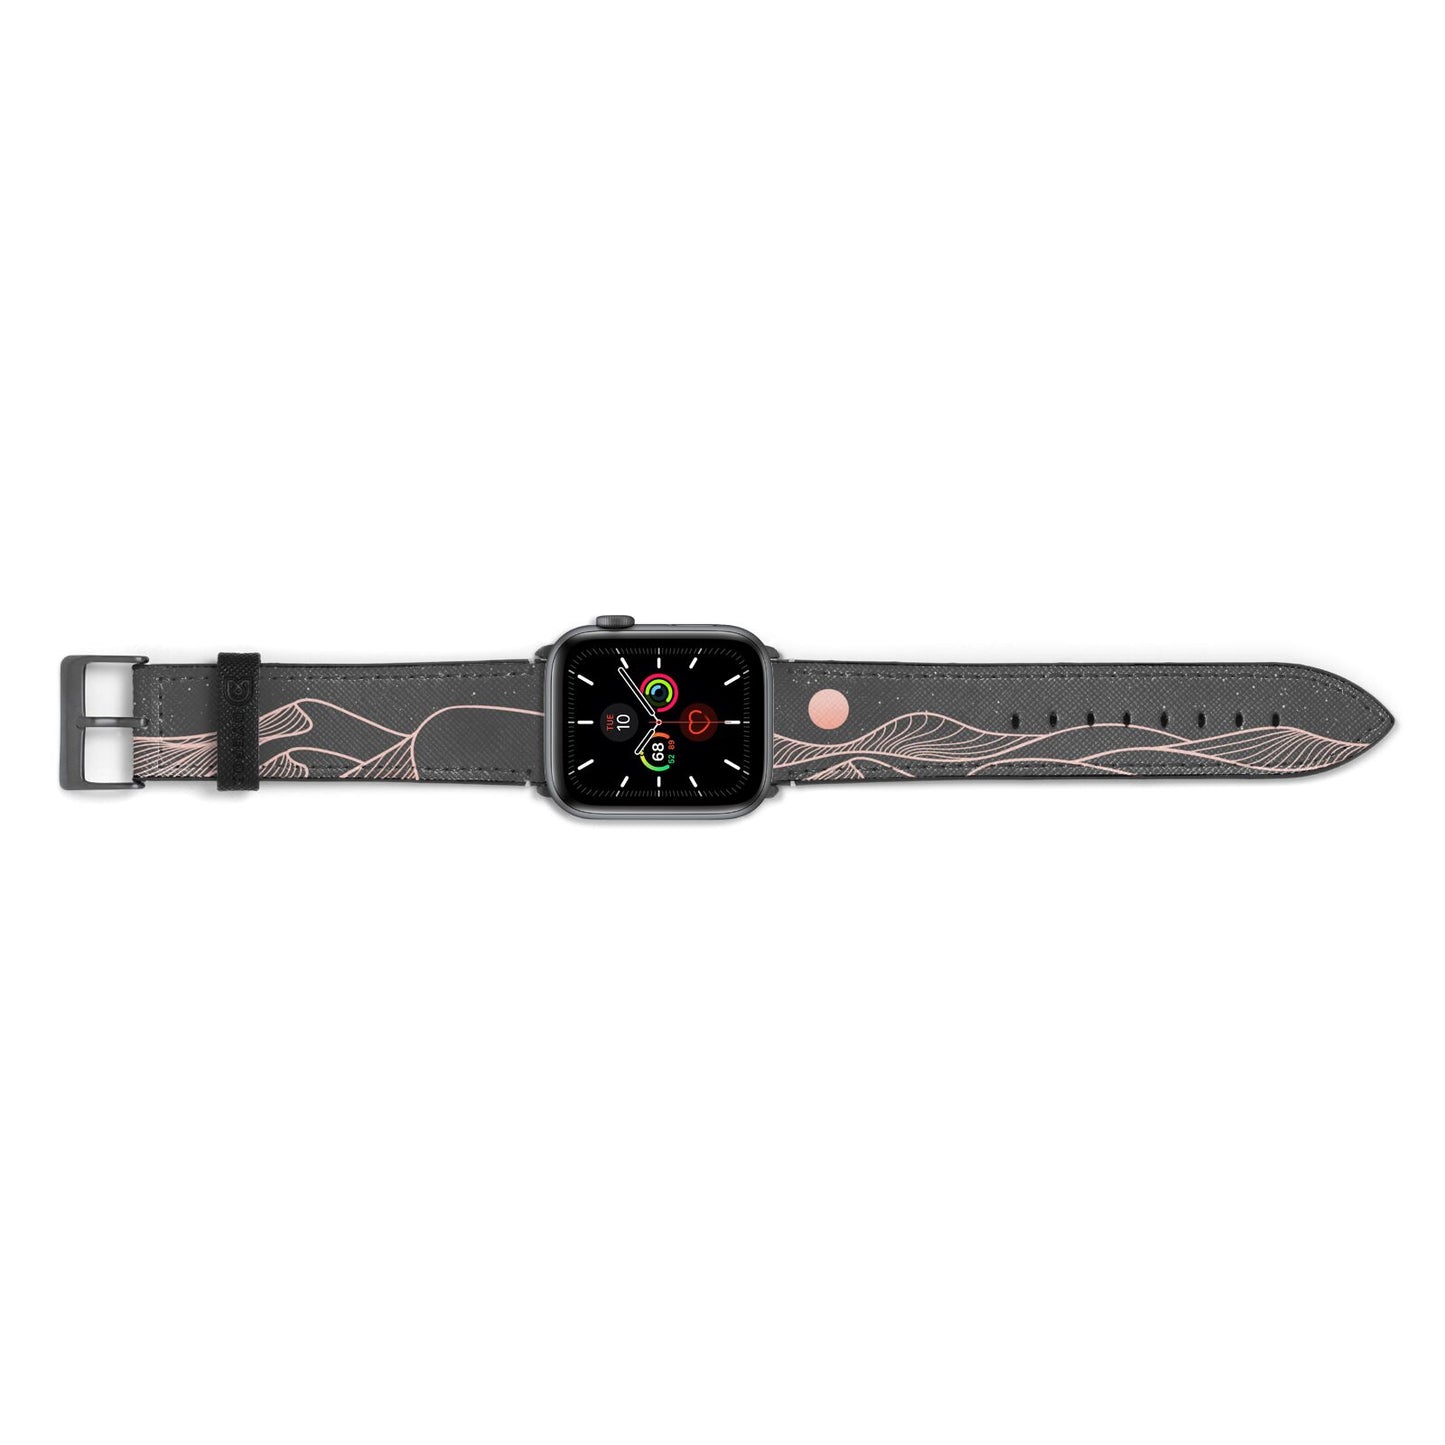 Abstract Sunset Apple Watch Strap Landscape Image Space Grey Hardware